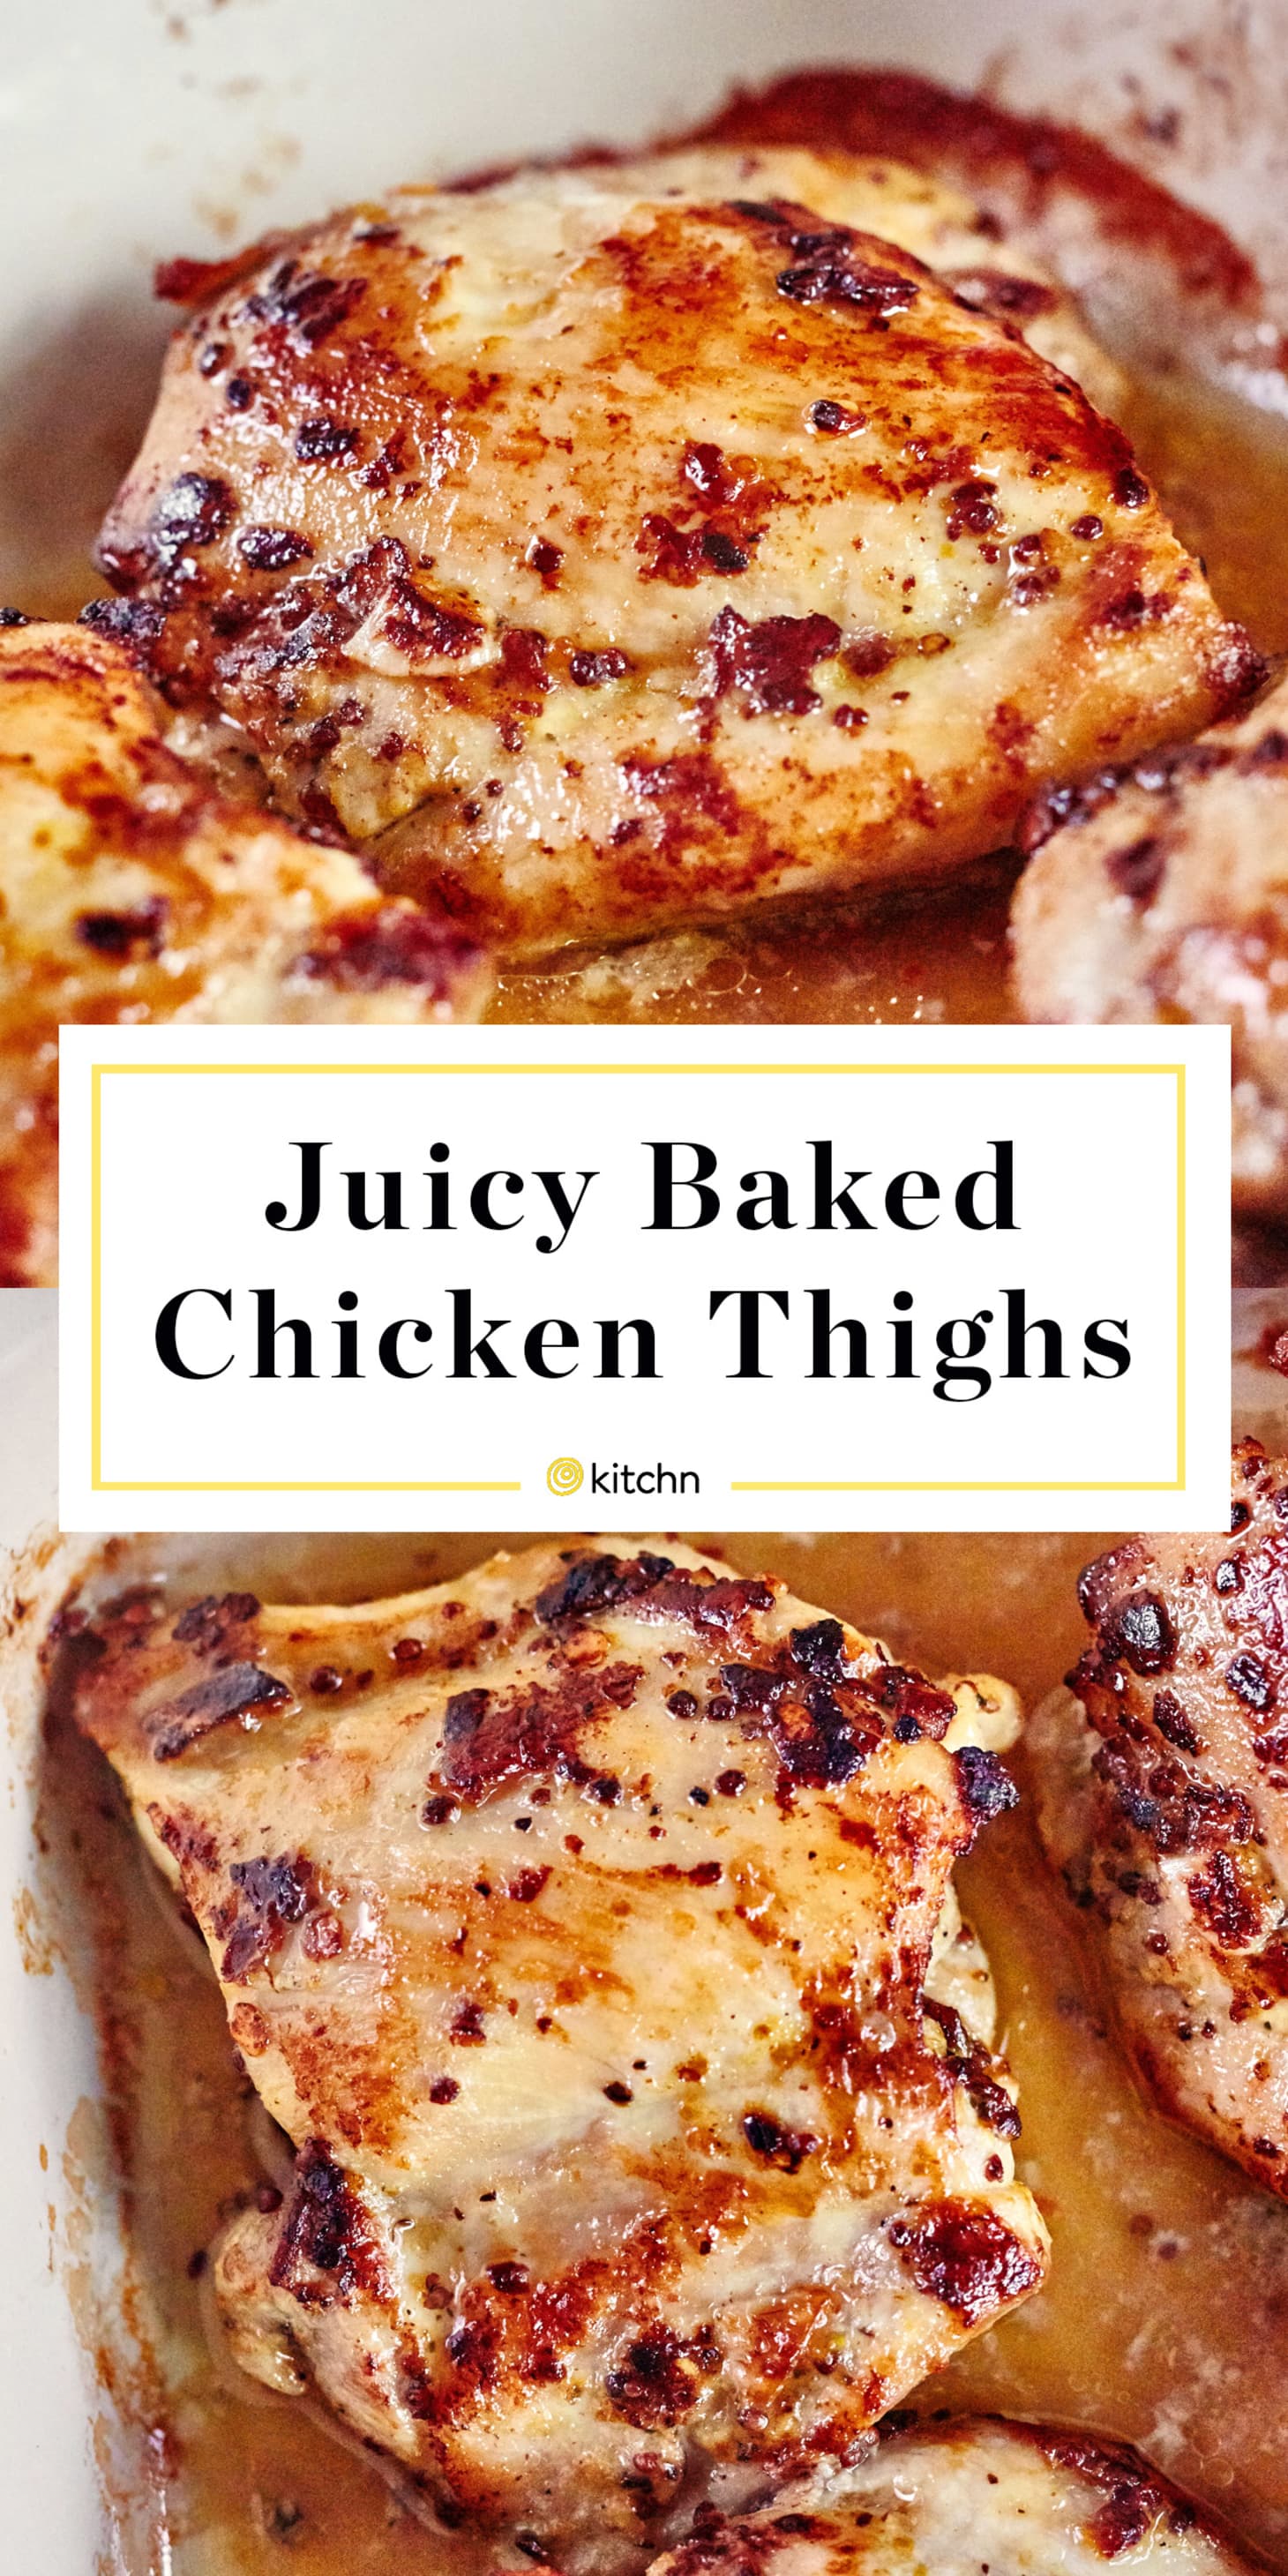 How To Cook Boneless, Skinless Chicken Thighs in the Oven | Kitchn